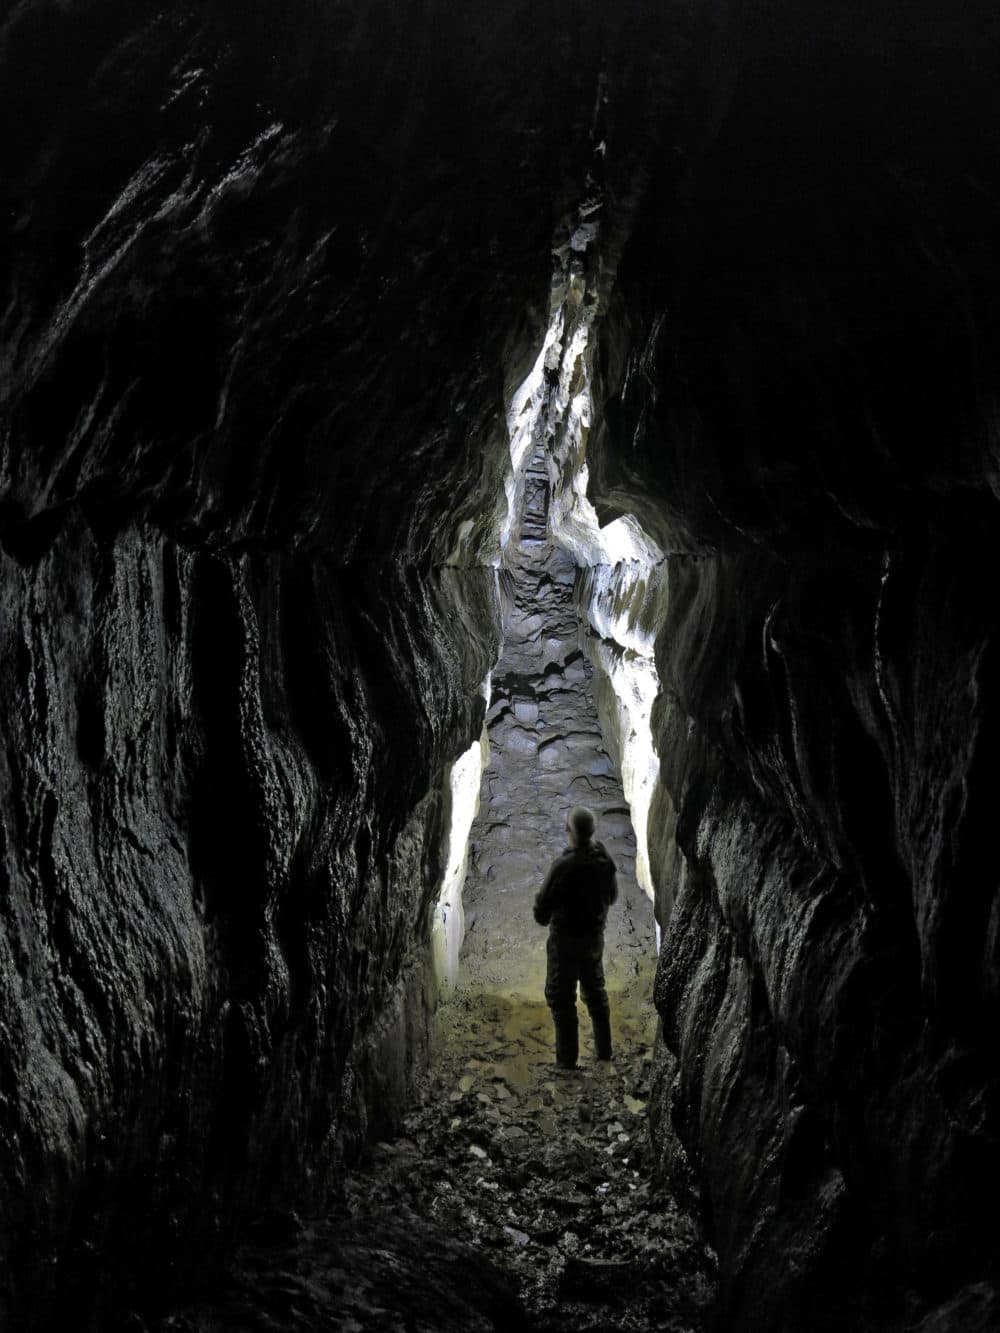 The Cave of Oweynagat. (Rathcroghan Visitor Centre)